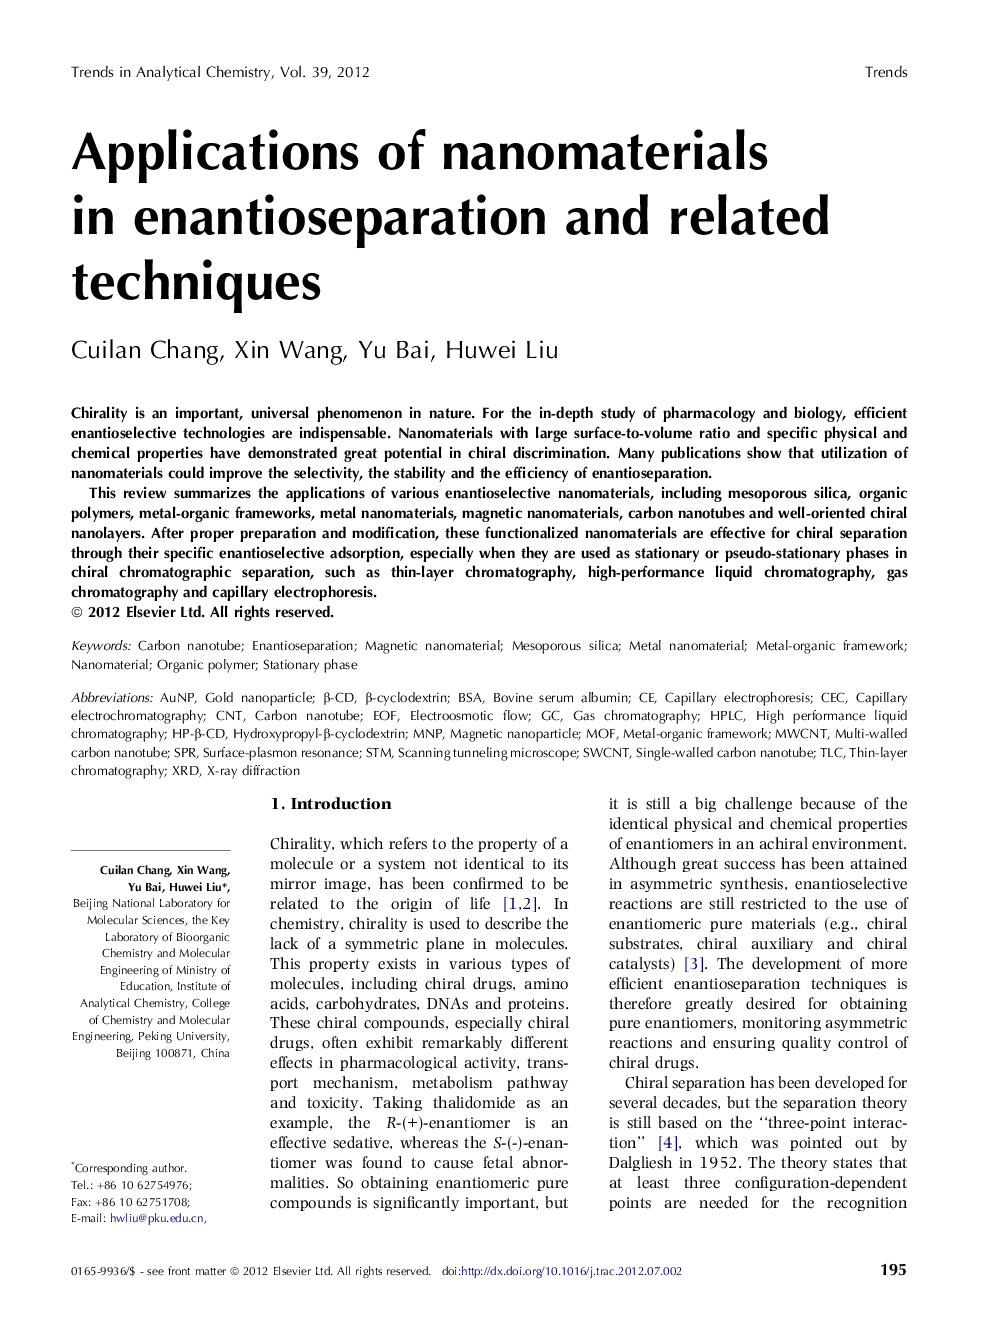 Applications of nanomaterials in enantioseparation and related techniques